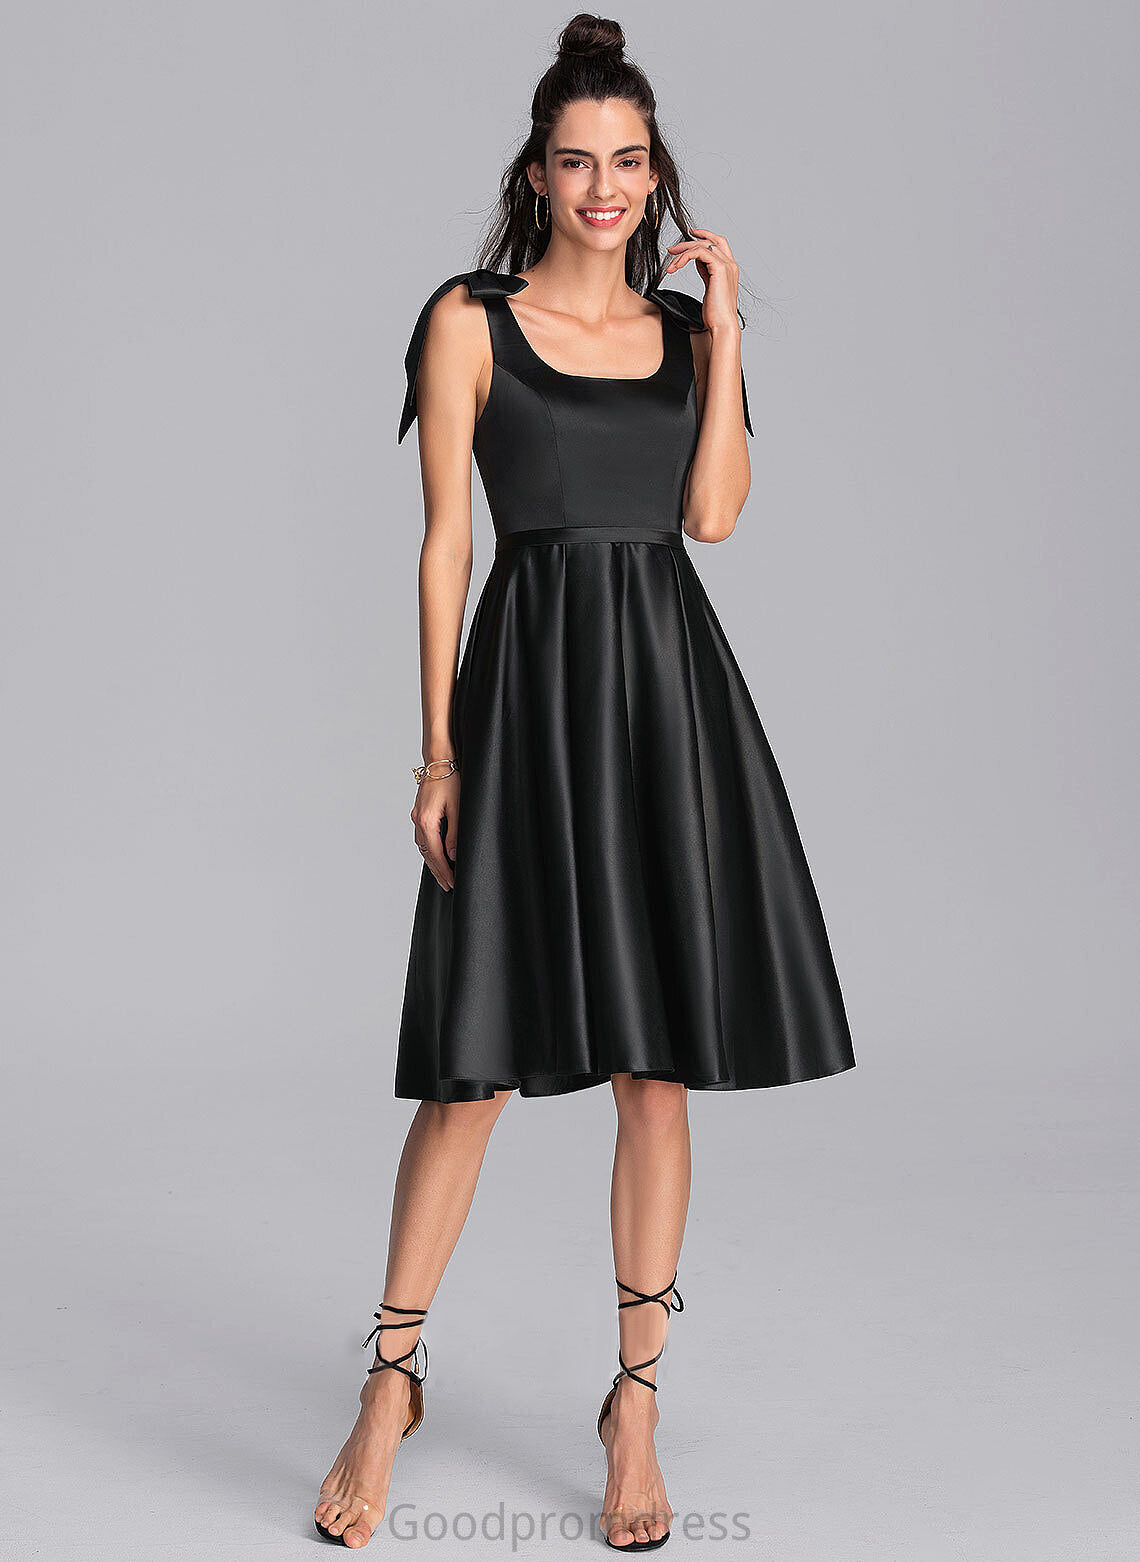 Bow(s) Homecoming Homecoming Dresses Satin Amirah Dress A-Line With Square Knee-Length Neckline